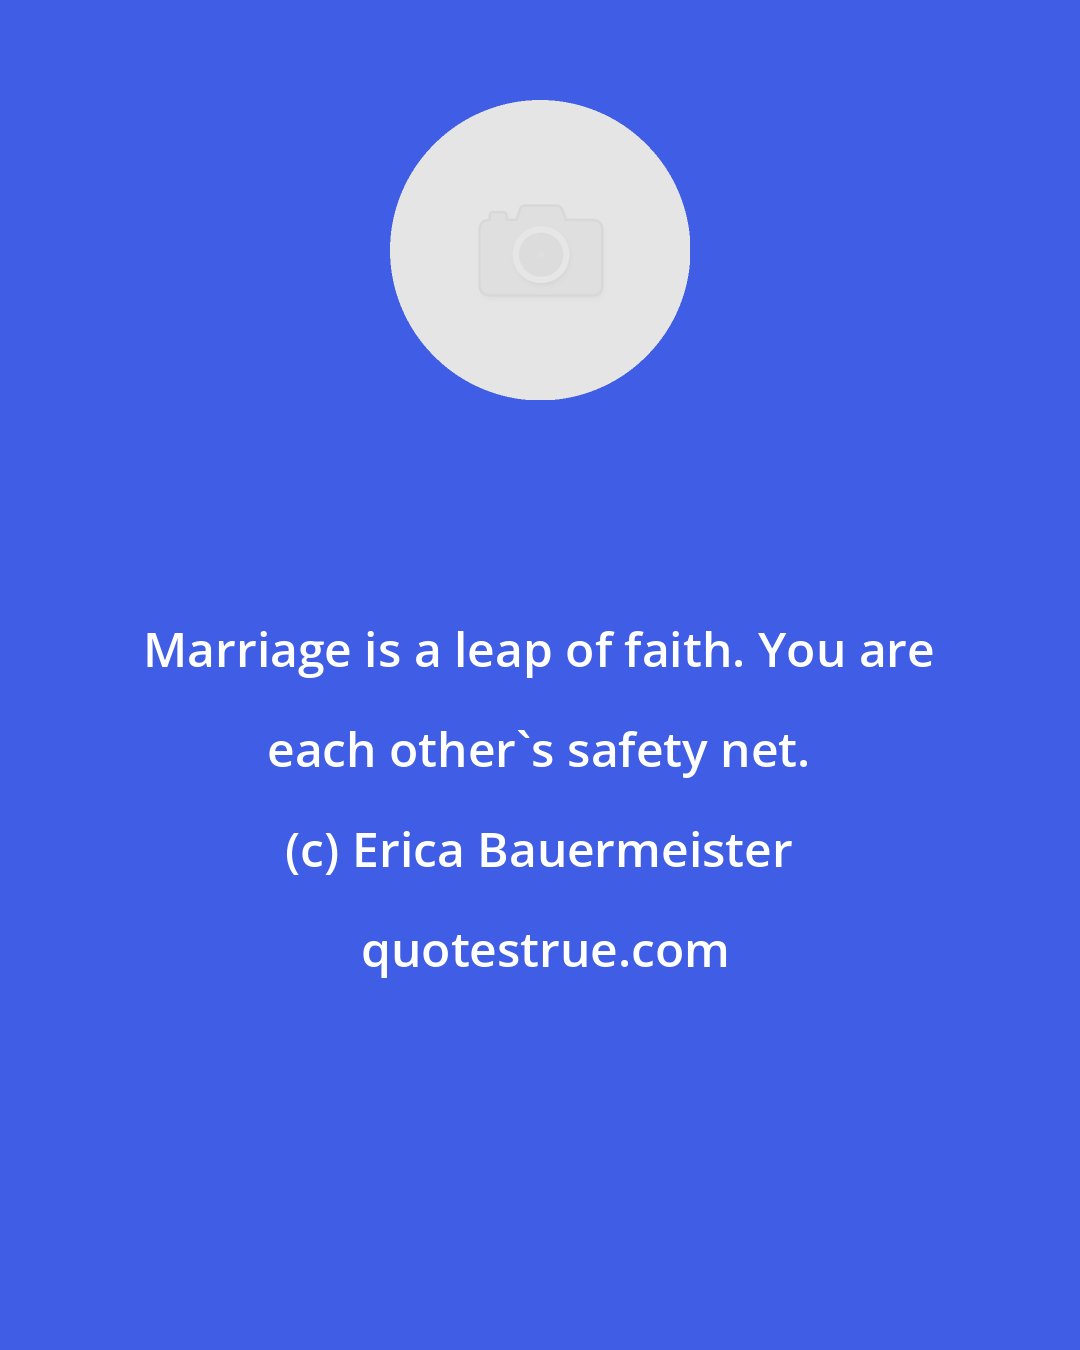 Erica Bauermeister: Marriage is a leap of faith. You are each other's safety net.